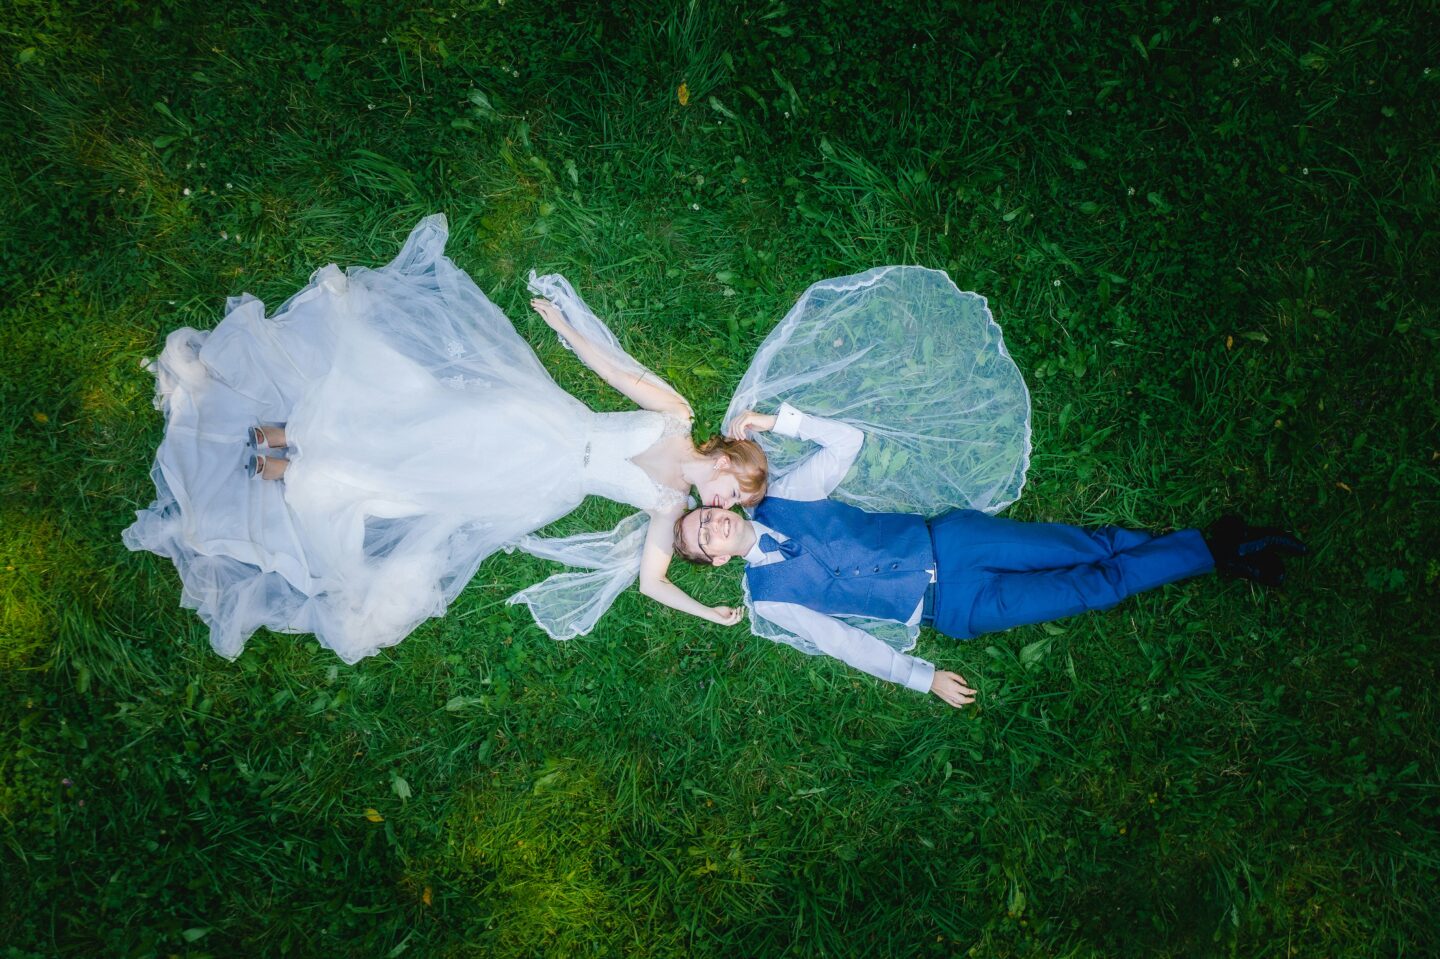 Drones and Beyond: The Role of Technology in Modern Wedding Photography 